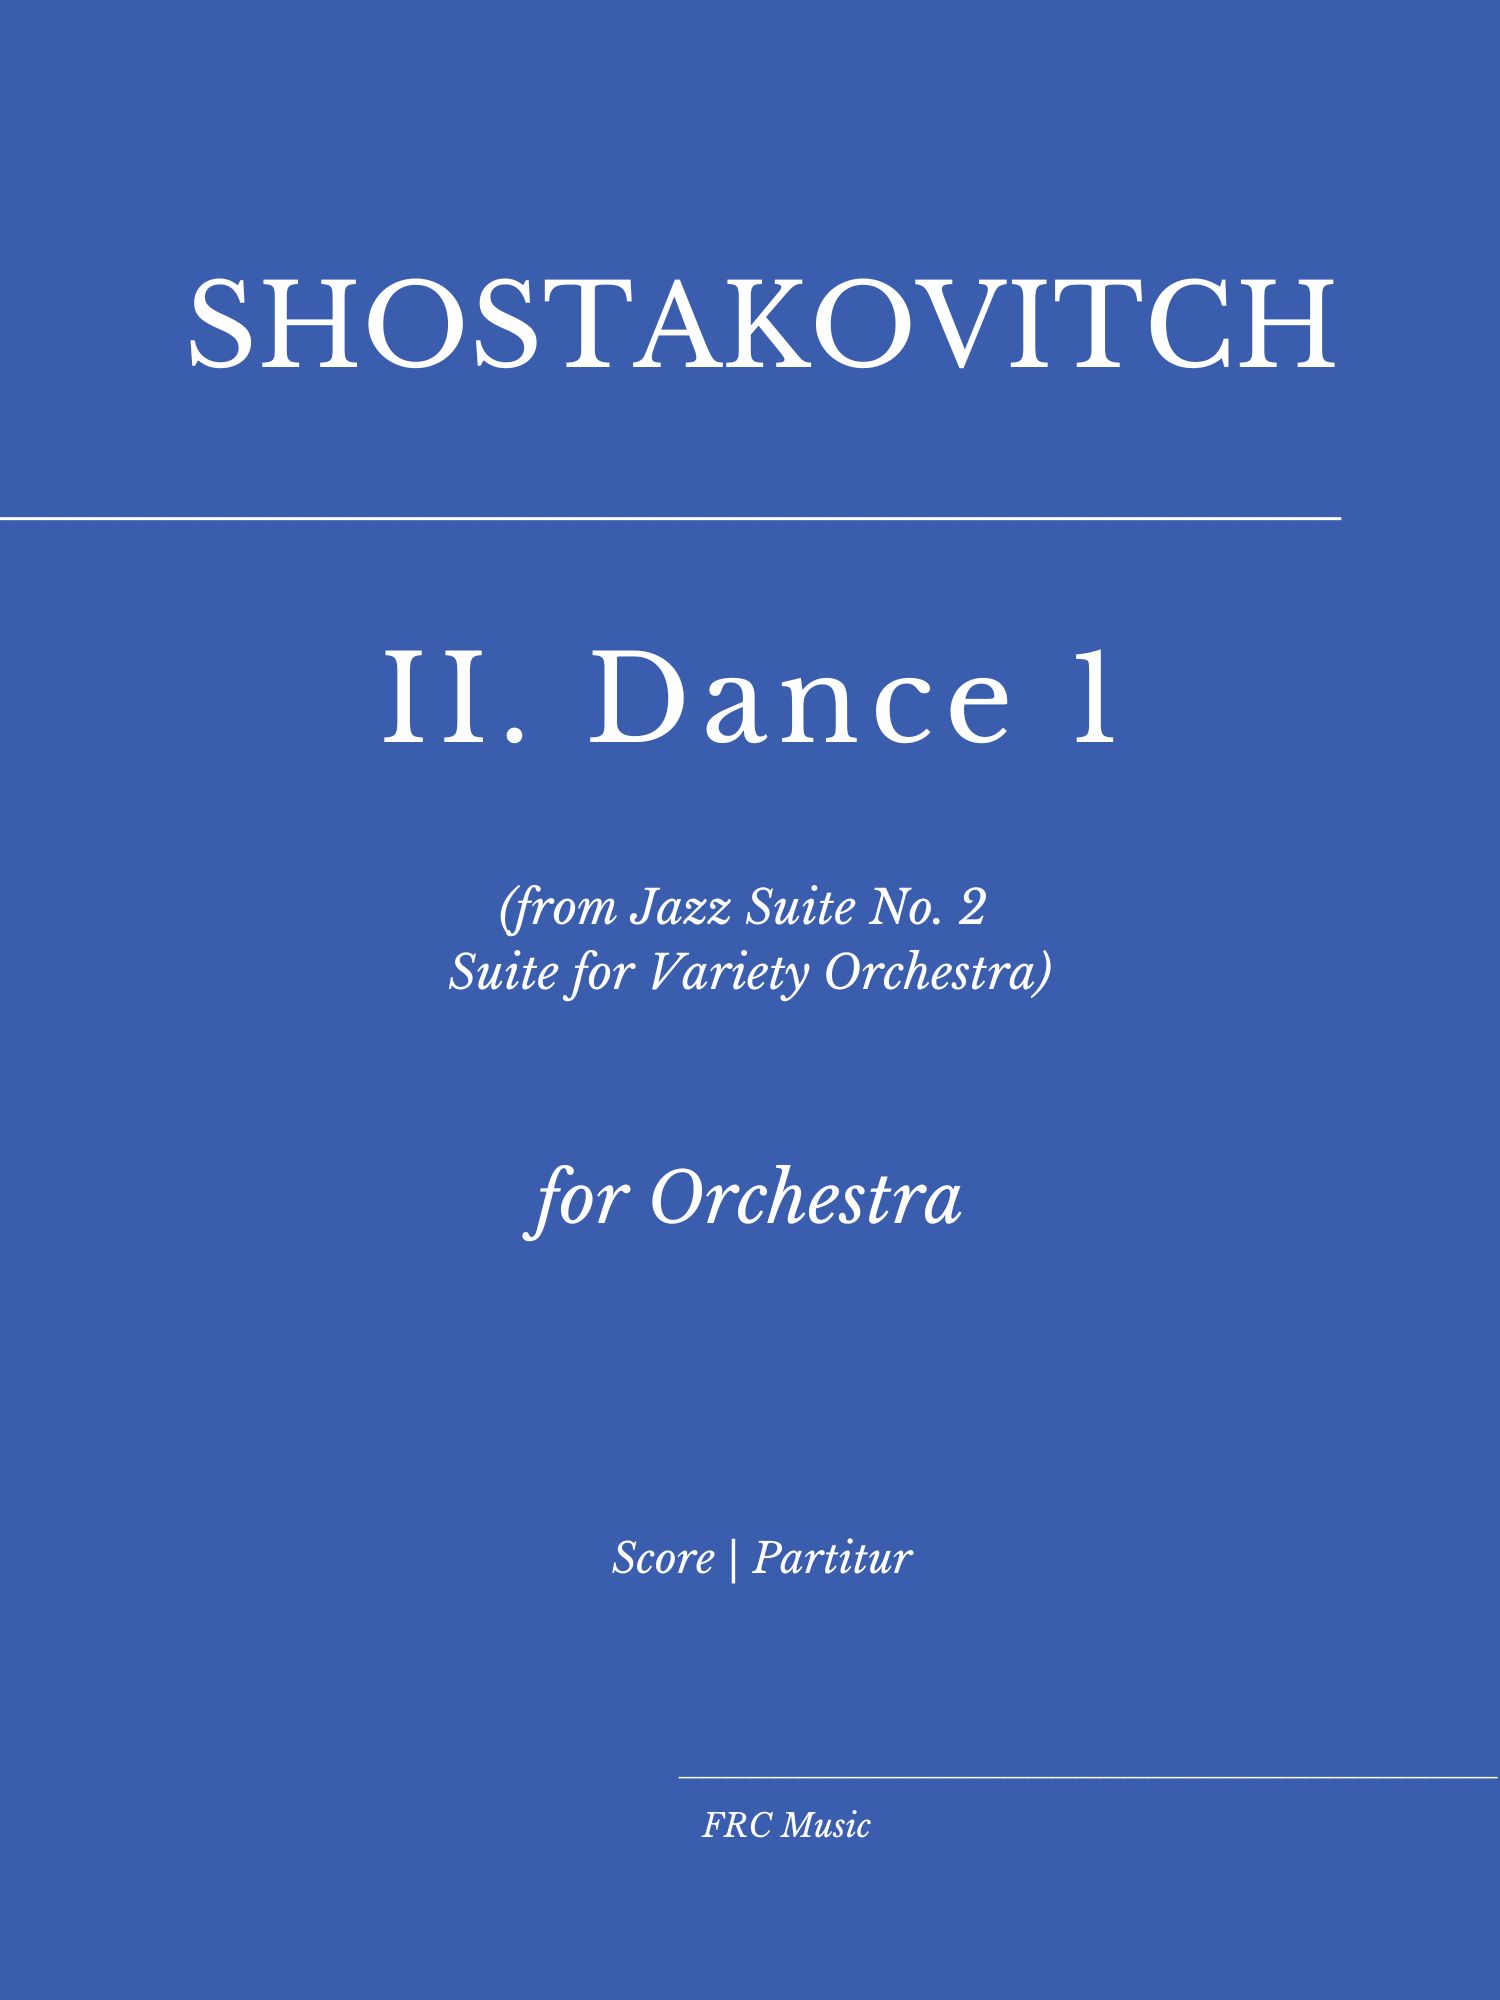 Dance I from Jazz Suite No. 2 Suite for Variety Orchestra